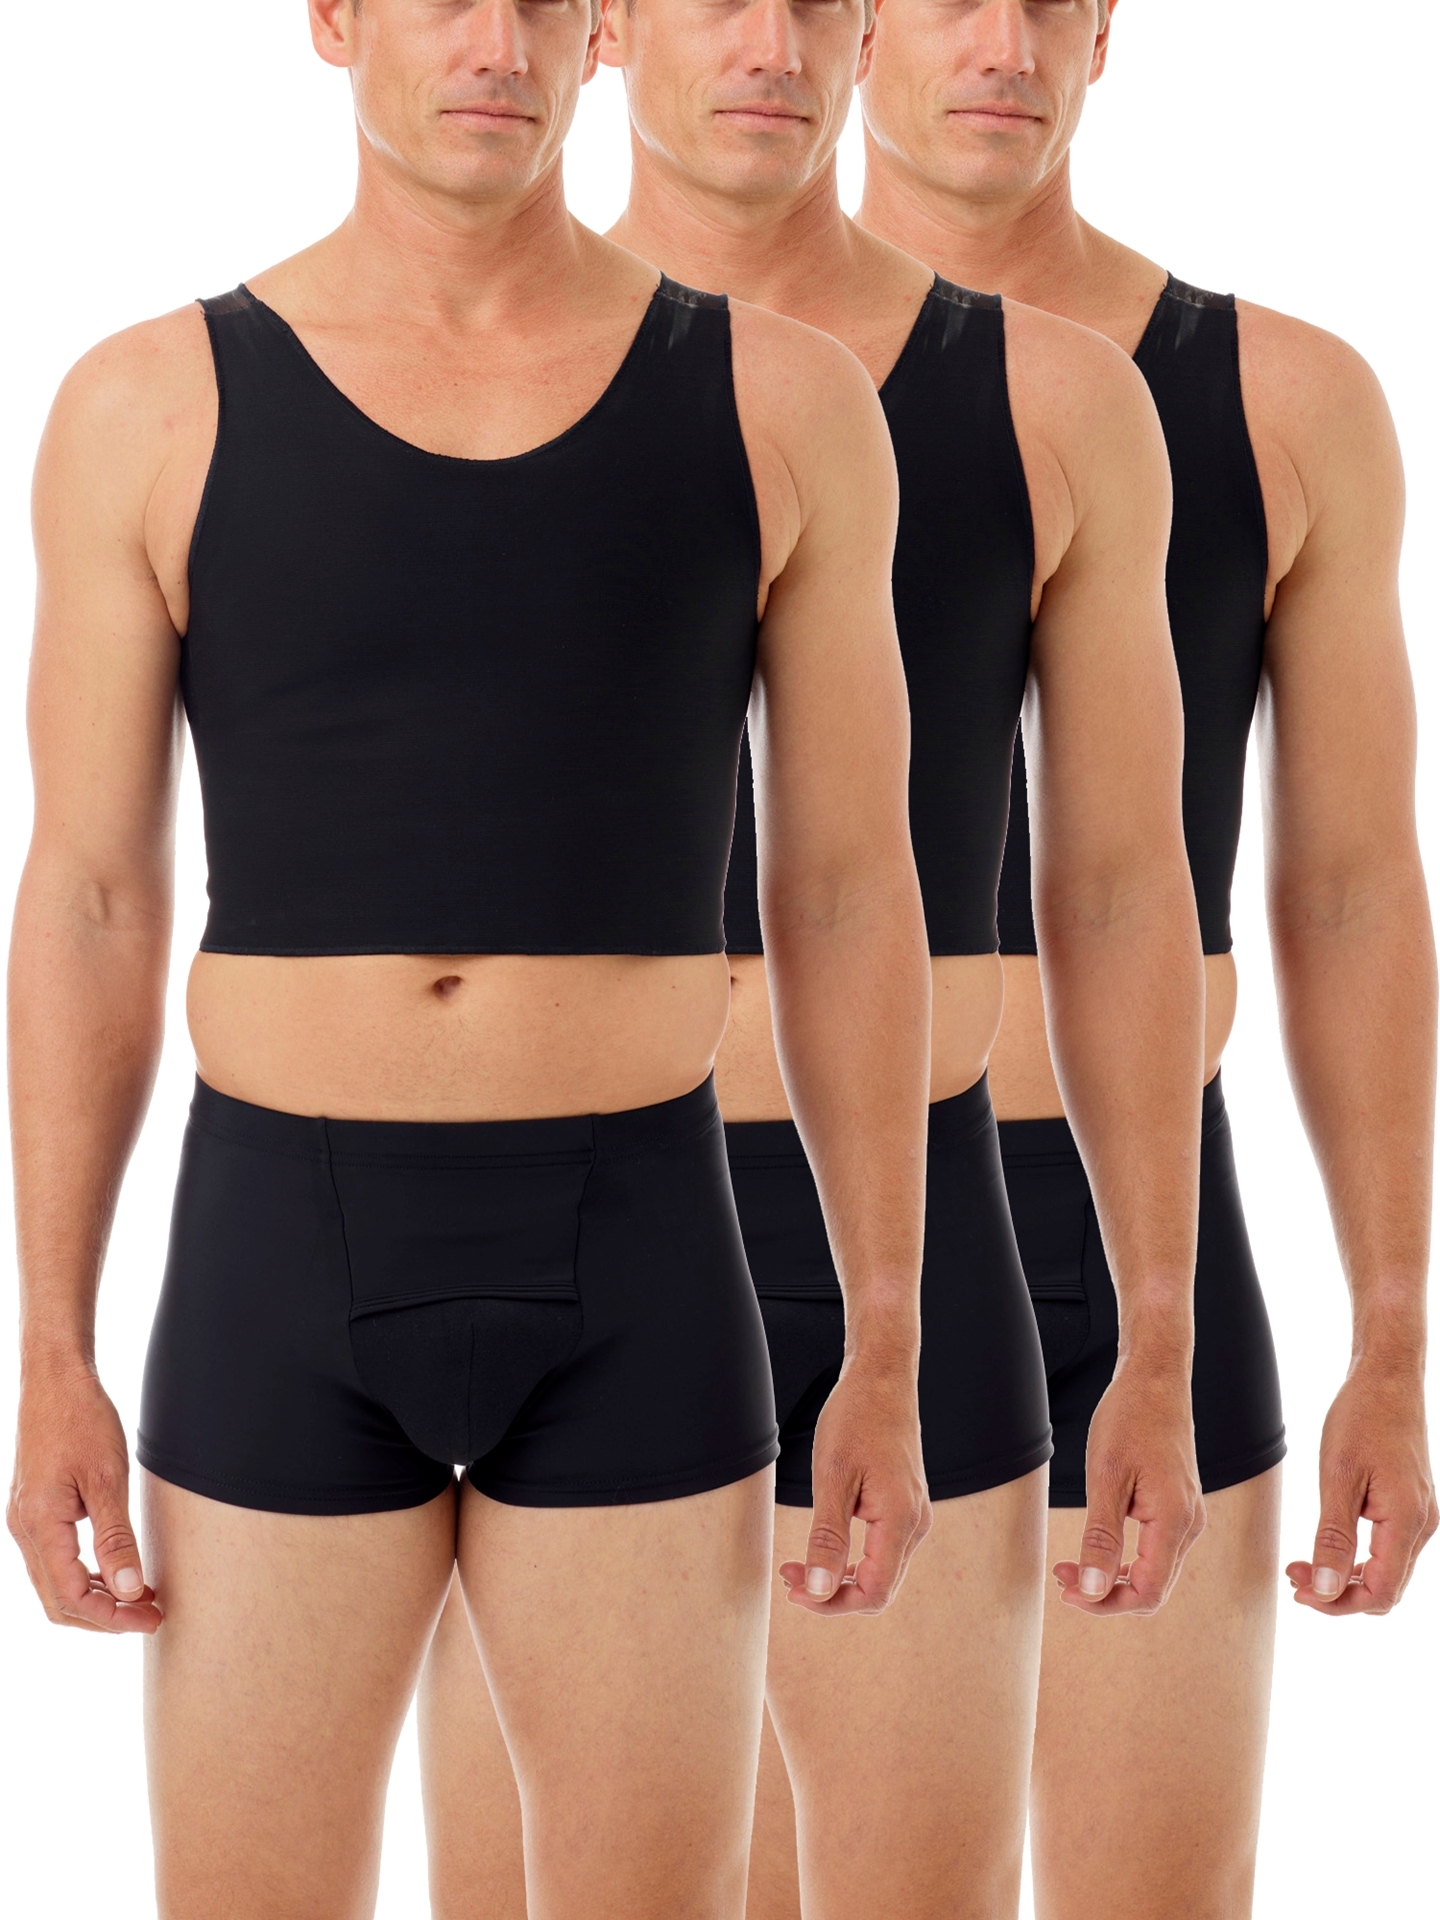 Ultimate Chest Binder Tank 3-Pack - Best mens extreme compression Shirt.  Men Compression Shirts, Girdles, Chest Binders, Hernia Garments